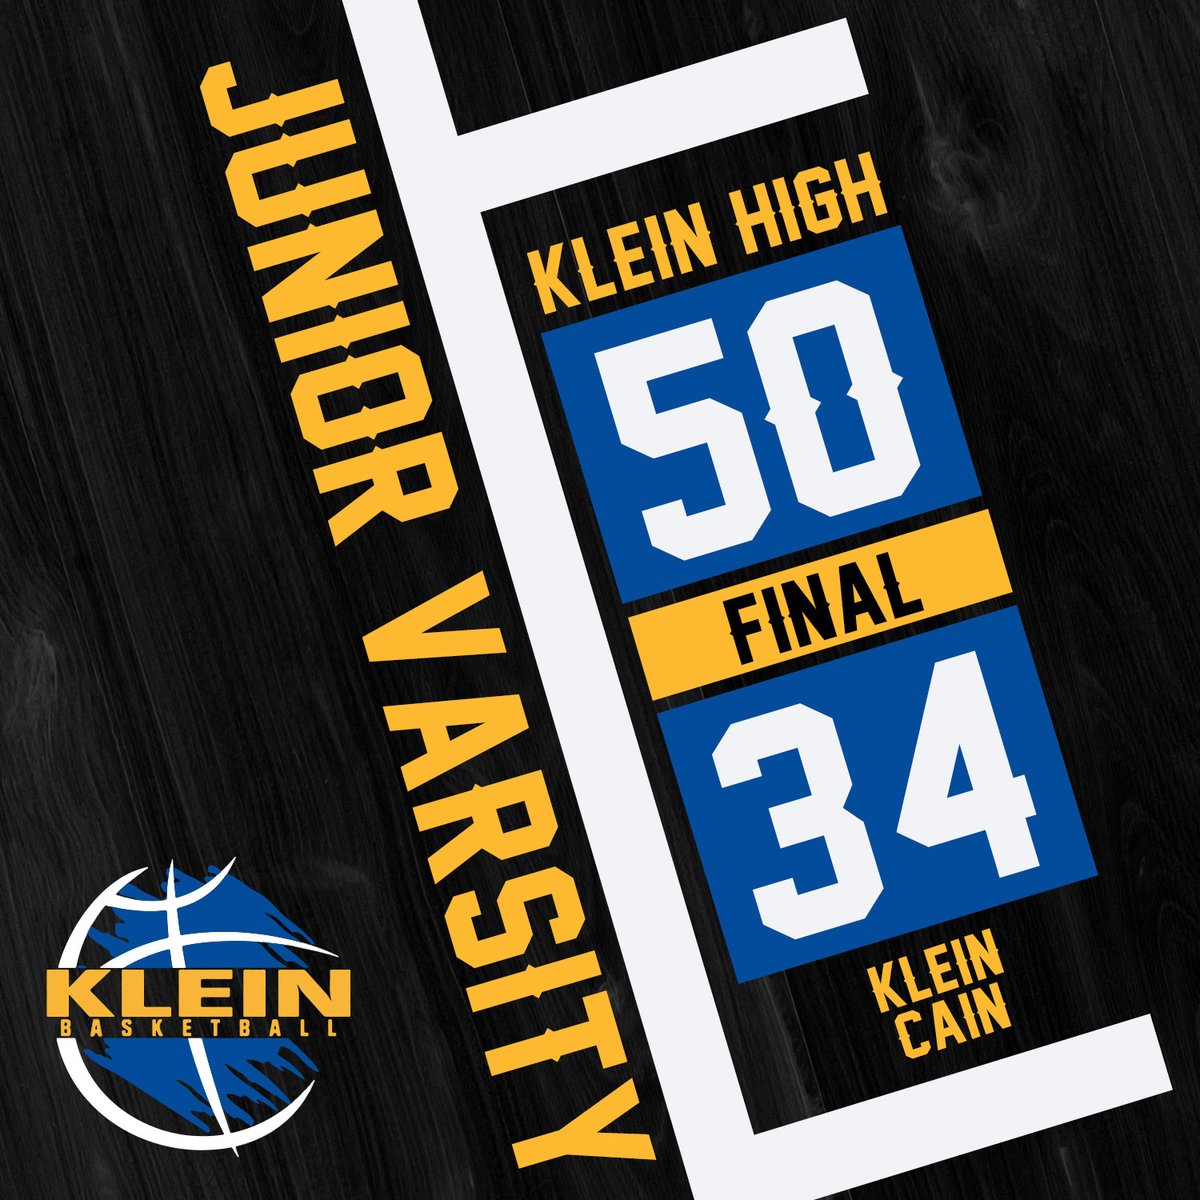 This was not just a win by the JV team, it was a statement.

#BallSoHard #NoOneLeftBehind #ChampionsMadeHere #victory #winning #teamplay #DominationModeActivated #UnstoppableForce
#JrVaristybasketball #kleinhighschool #kleinisd #highschoolbasketball #kleinbearkatbasketball